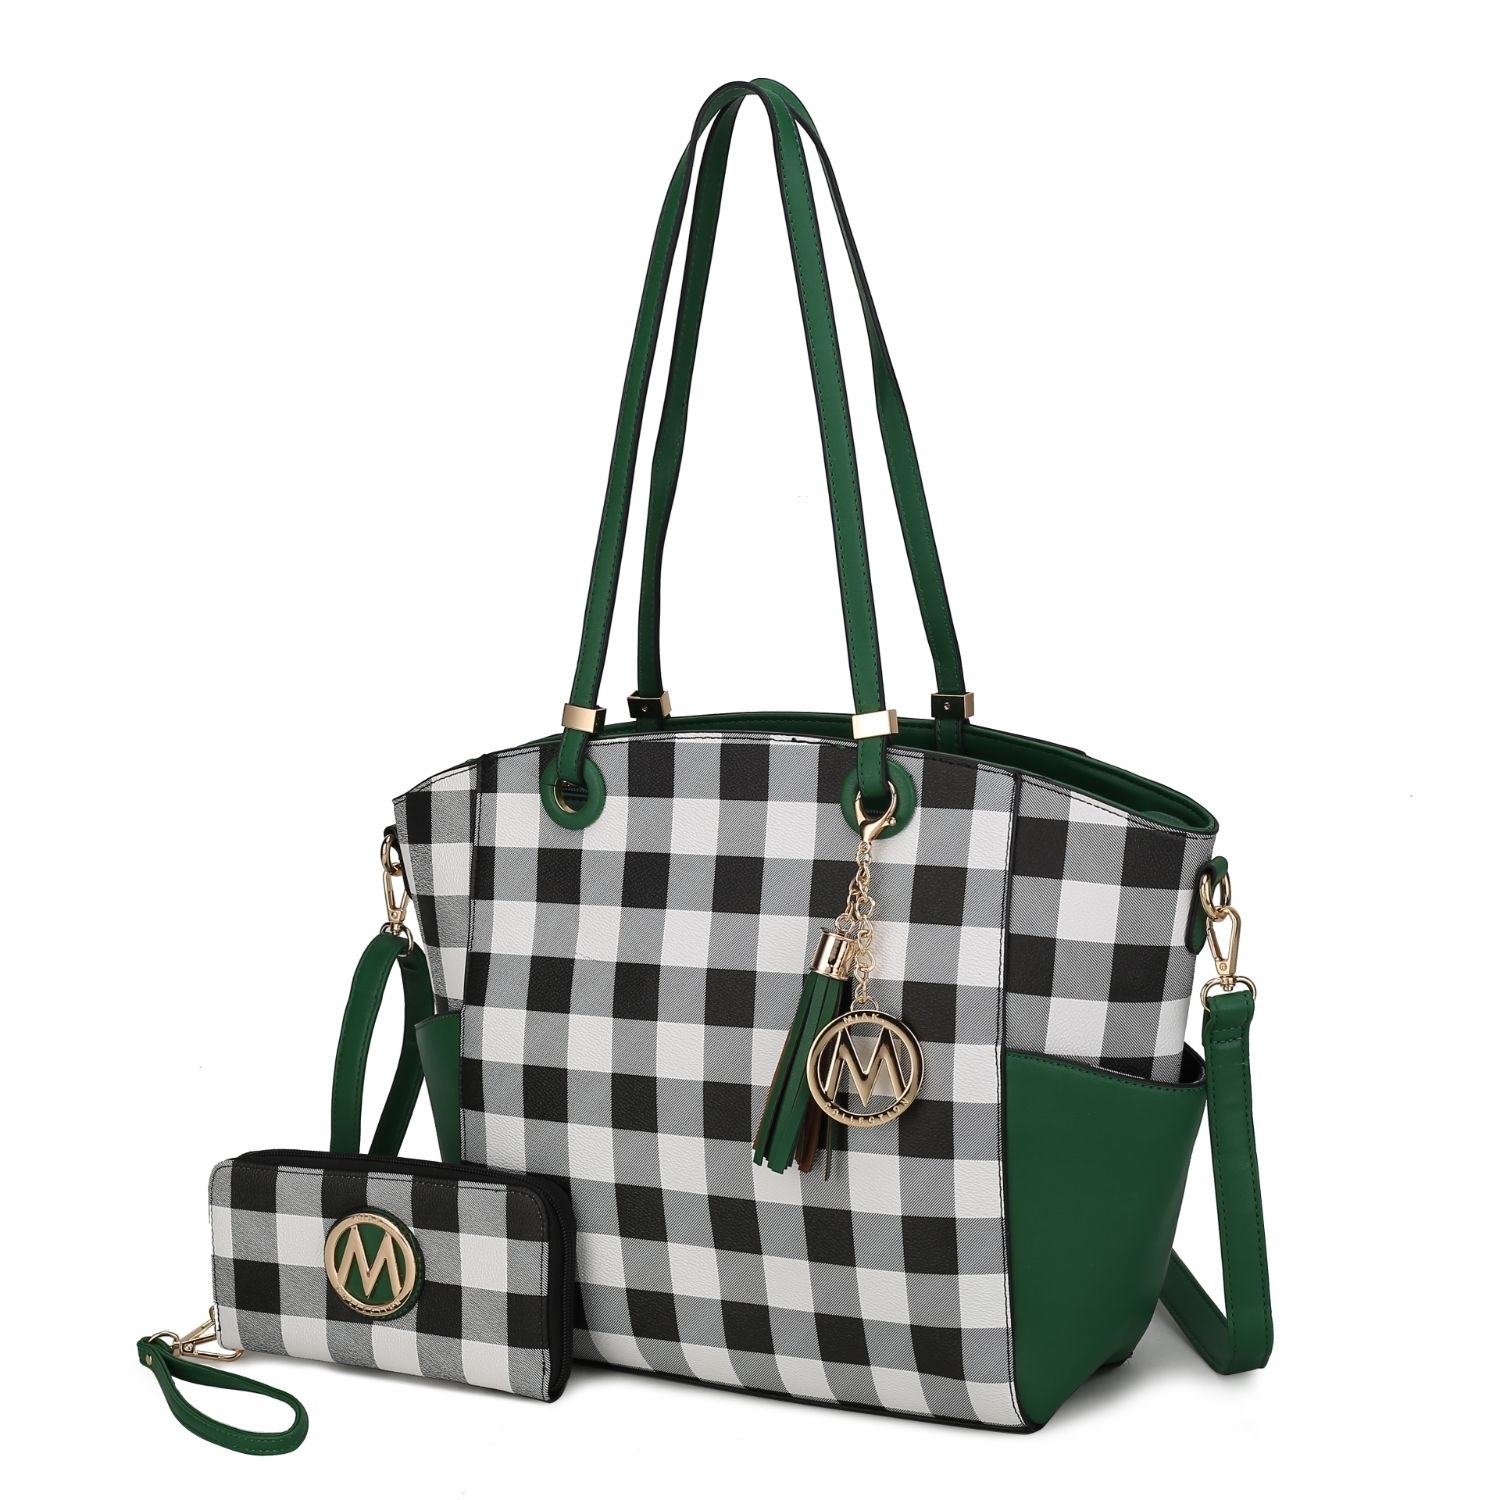 MKF Collection Karlie Tote Handbag With Wallet By Mia K - 2 Pieces - Green